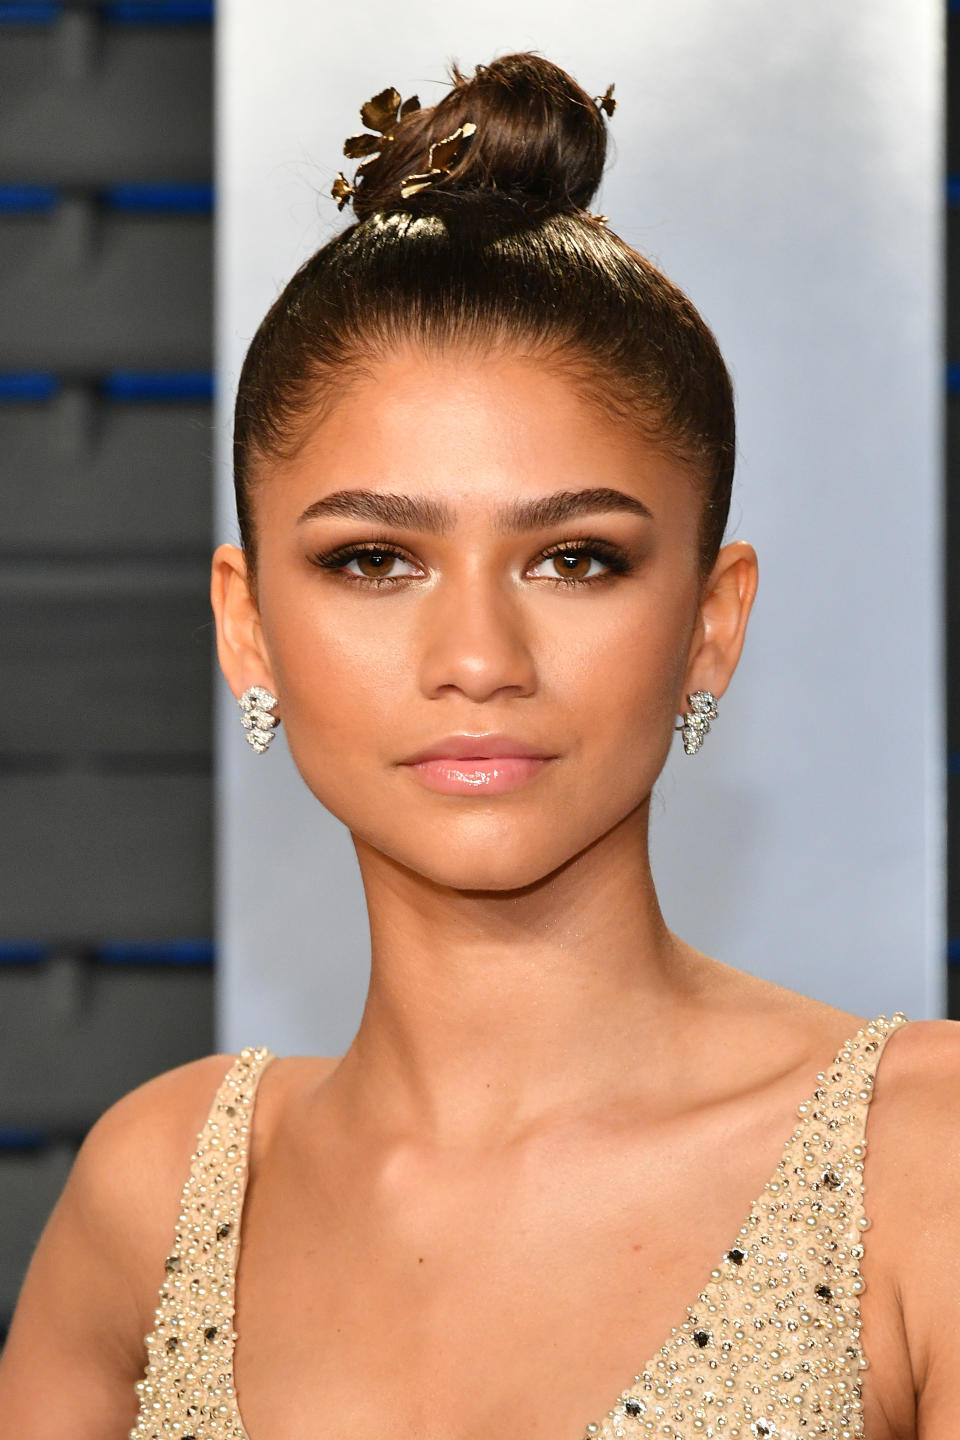 Zendaya, pictured in full glam mode at the 2018 Oscars, recently opted for a softer look. (Photo: Dia Dipasupil/Getty Images)